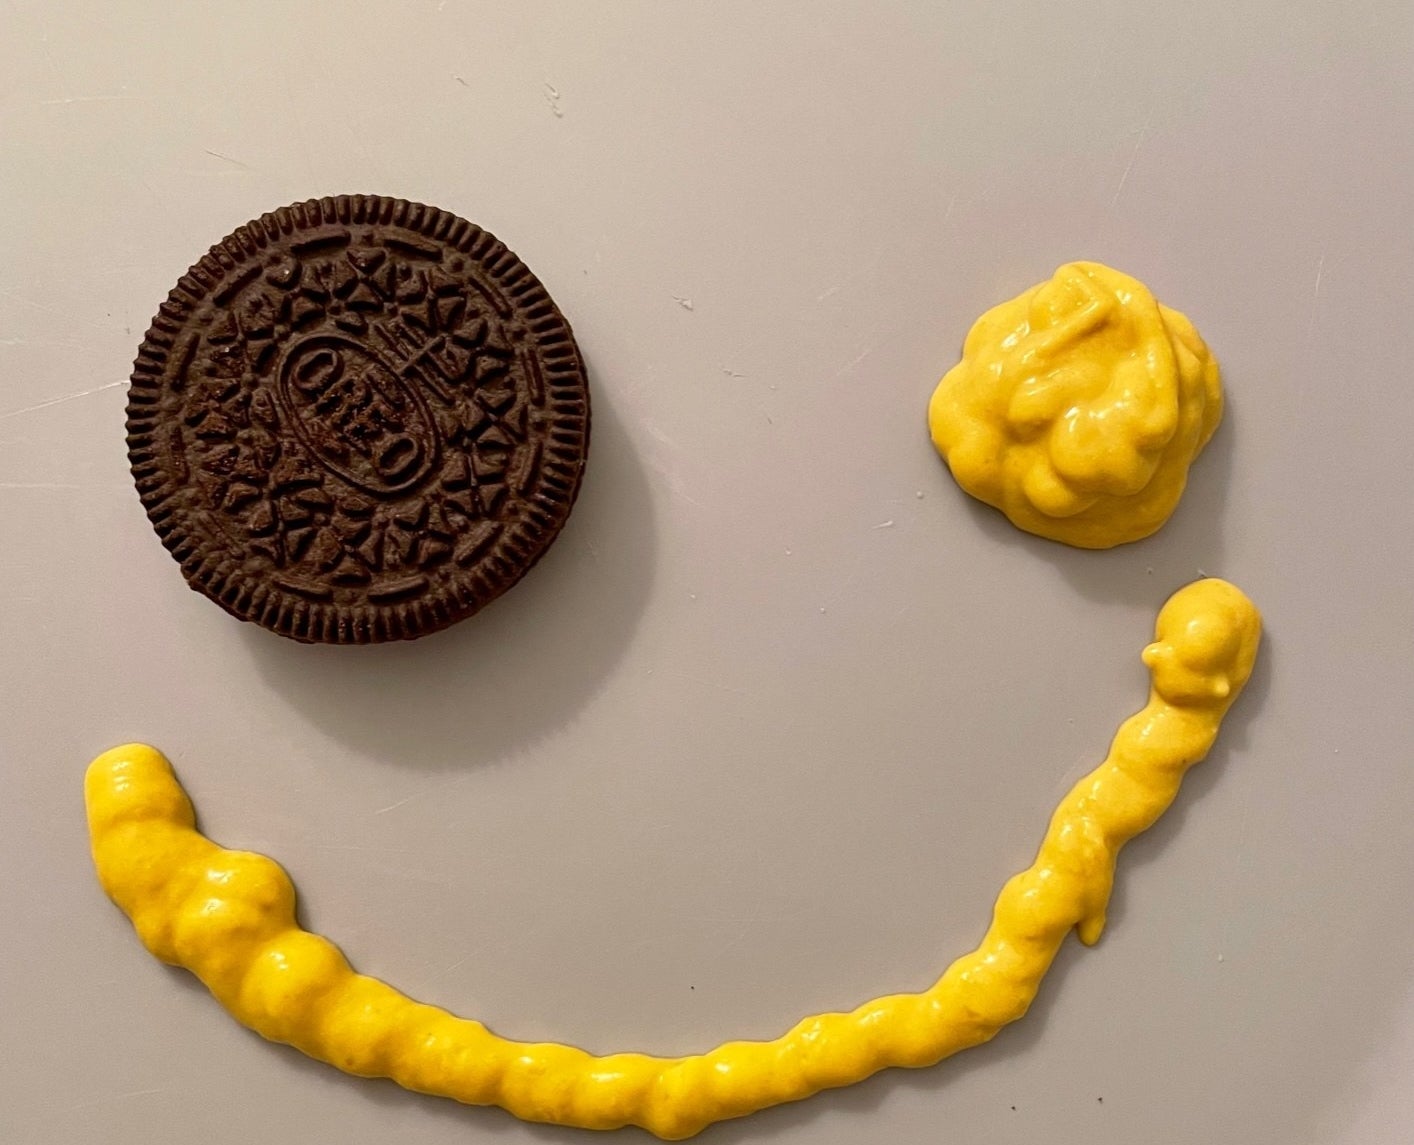 An Oreo with mustard